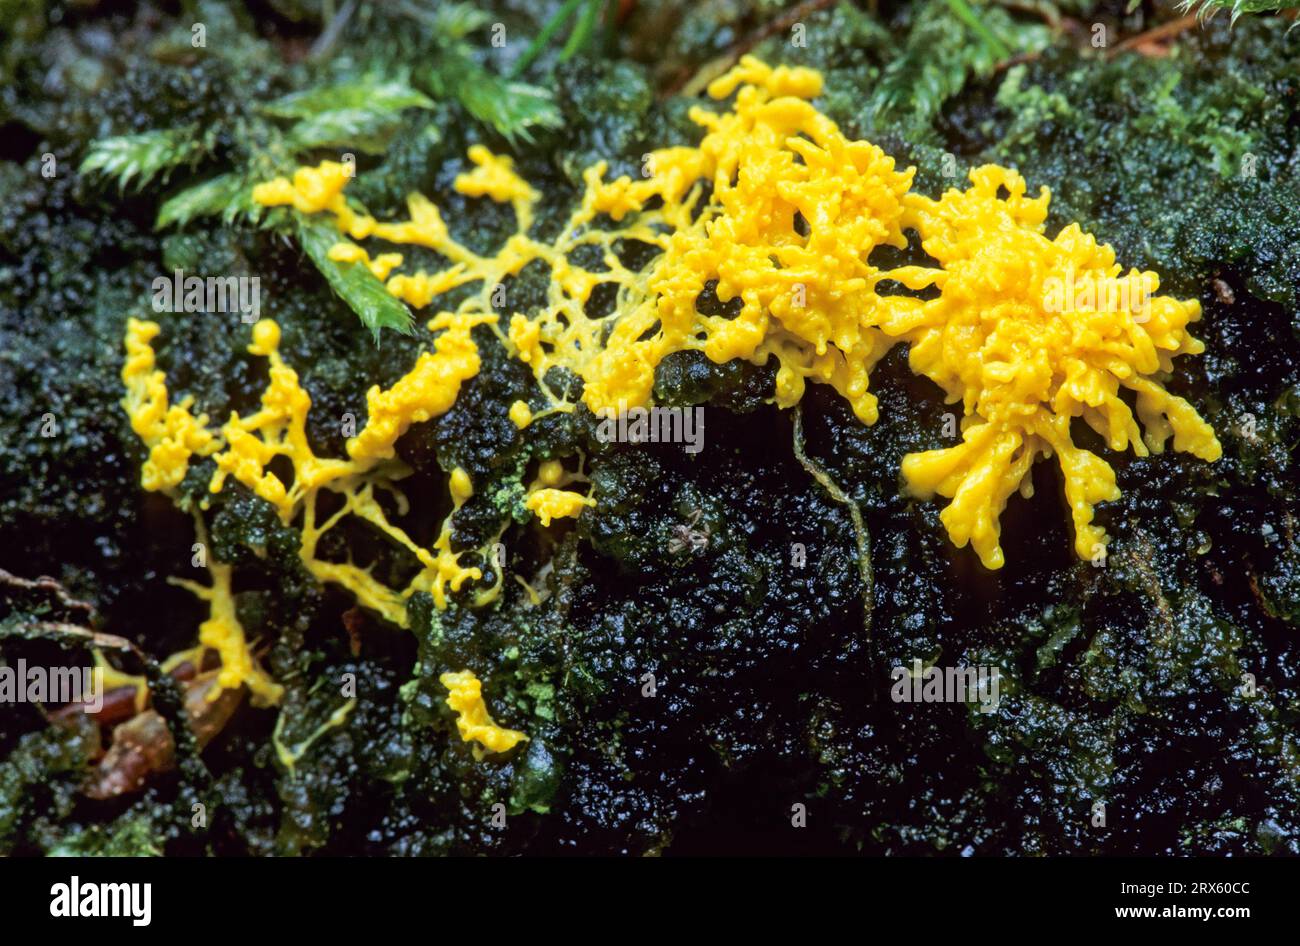 Dog vomit slime mold (Fuligo septica) is a slime mould and distributed worldwide (Witch Butter), Dog Vomit Slime Mold exists worldwide (Scrambled Egg Stock Photo